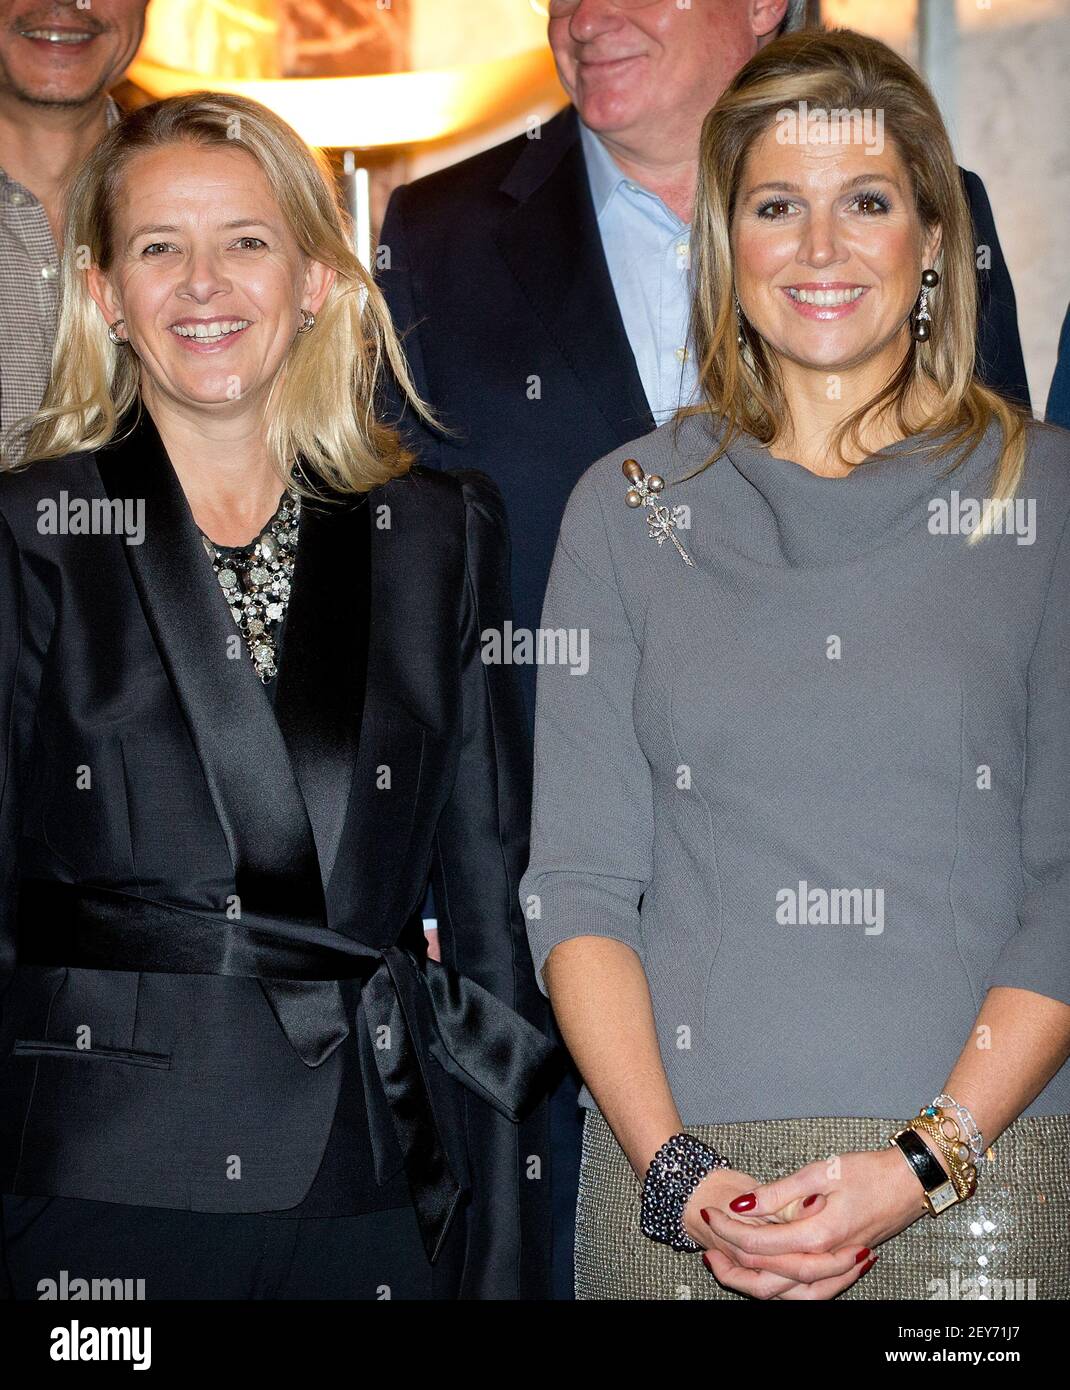 10-12-2014 AMSTERDAM - Queen Maxima and Princess Mabel attend the award ceremony of the Prince Claus Prize 2014 to Columbian artist and plant expert Abel RodrÃguez at the Royal Palace in Amsterdam (Photo by Robin Utrecht/Sipa USA) Stock Photo